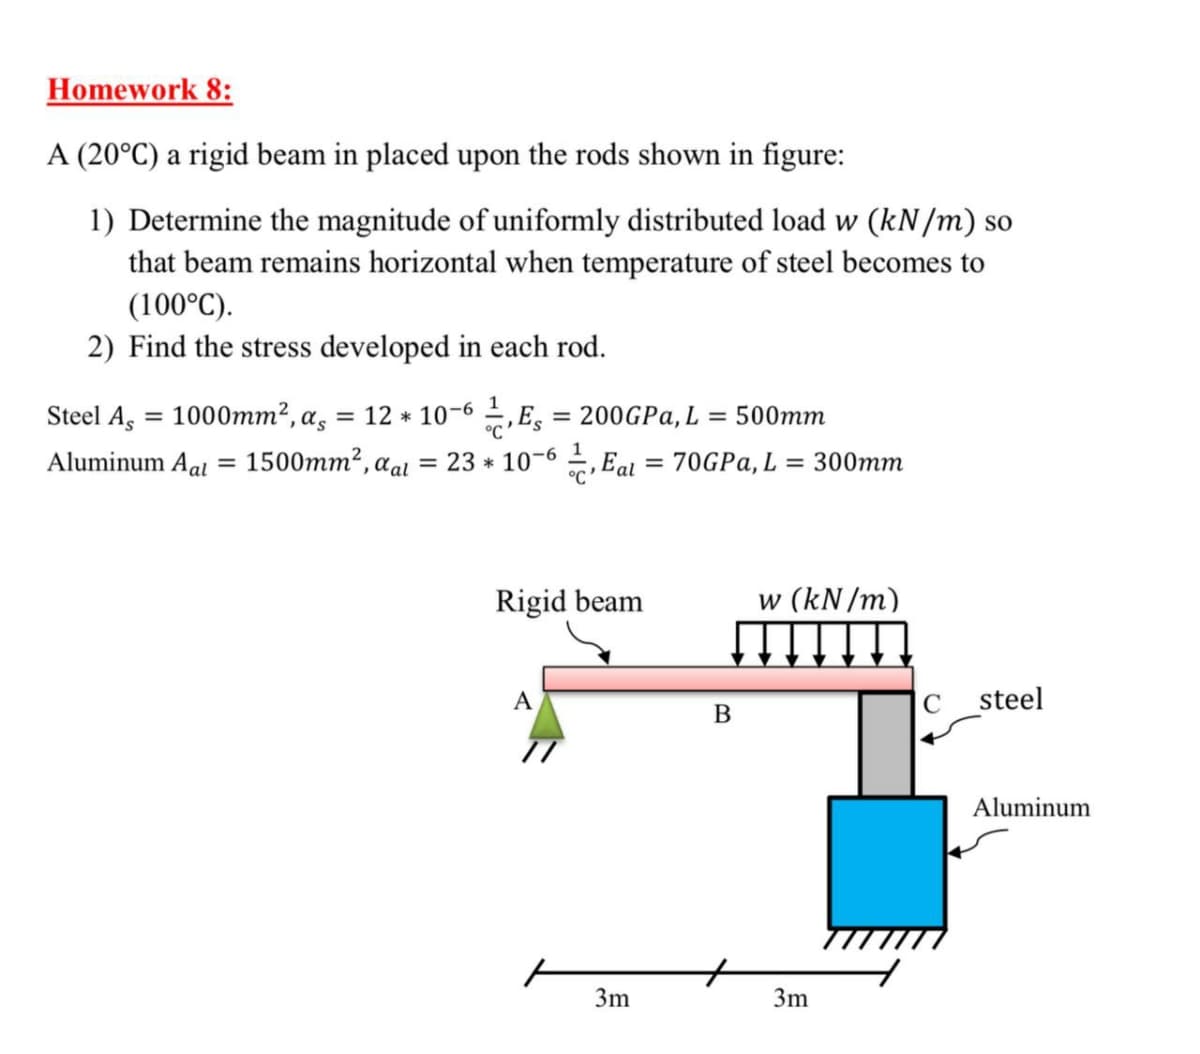 Homework 8:
A (20°C) a rigid beam in placed upon the rods shown in figure:
1) Determine the magnitude of uniformly distributed load w (kN/m) so
that beam remains horizontal when temperature of steel becomes to
(100°C).
2) Find the stress developed in each rod.
Steel A, = 1000mm², as
= 12 * 10-6 , E, = 200GPA, L
= 500mm
%3D
%3D
Aluminum Aal
1500mm2, aal = 23 * 10-6 , Eal = 70GPA, L
= 300mm
%3|
Rigid beam
w (kN /m)
A
C
steel
Aluminum
3m
3m
